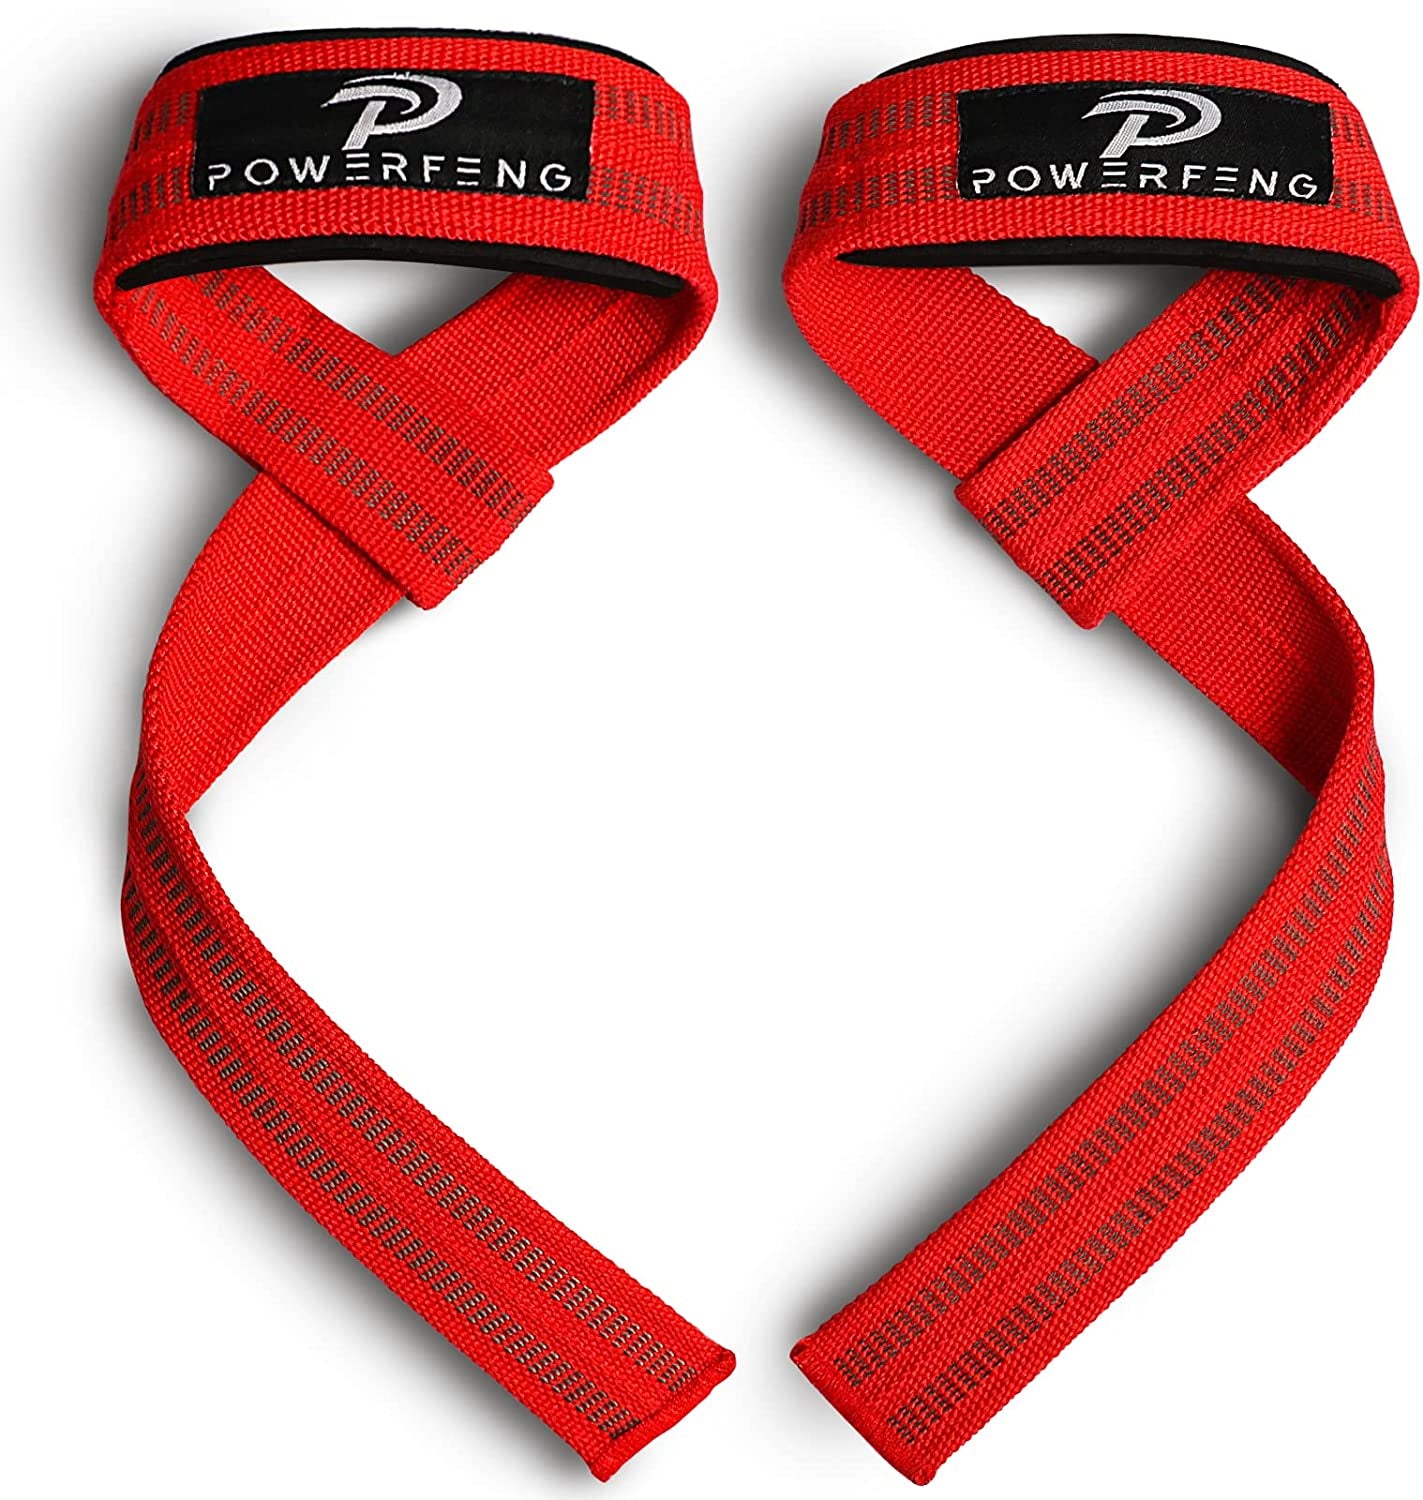 Spring Lifting Wrist Straps for Weightlifting: Deadlift Weighting Strap for Women & Men Weightlift Dead Lifting Straps with Wrist Padded for Deadlifting Bodybuilding Powerlifting